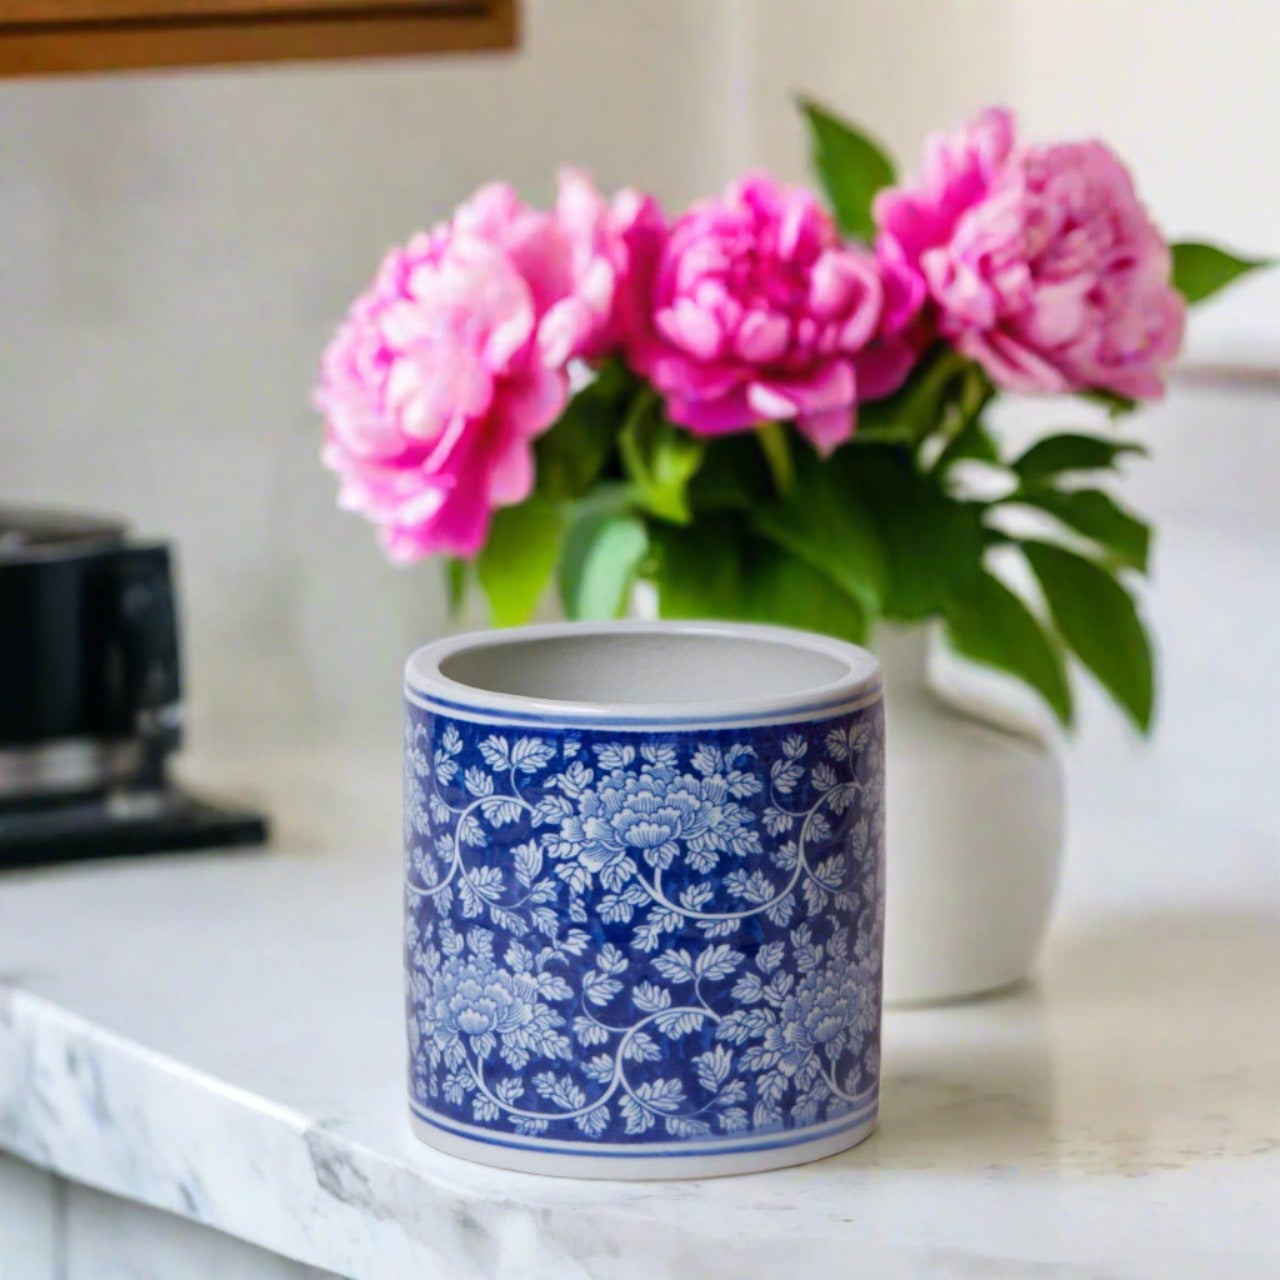 Dark Scrolling Peony Blue and White Porcelain Cachepot